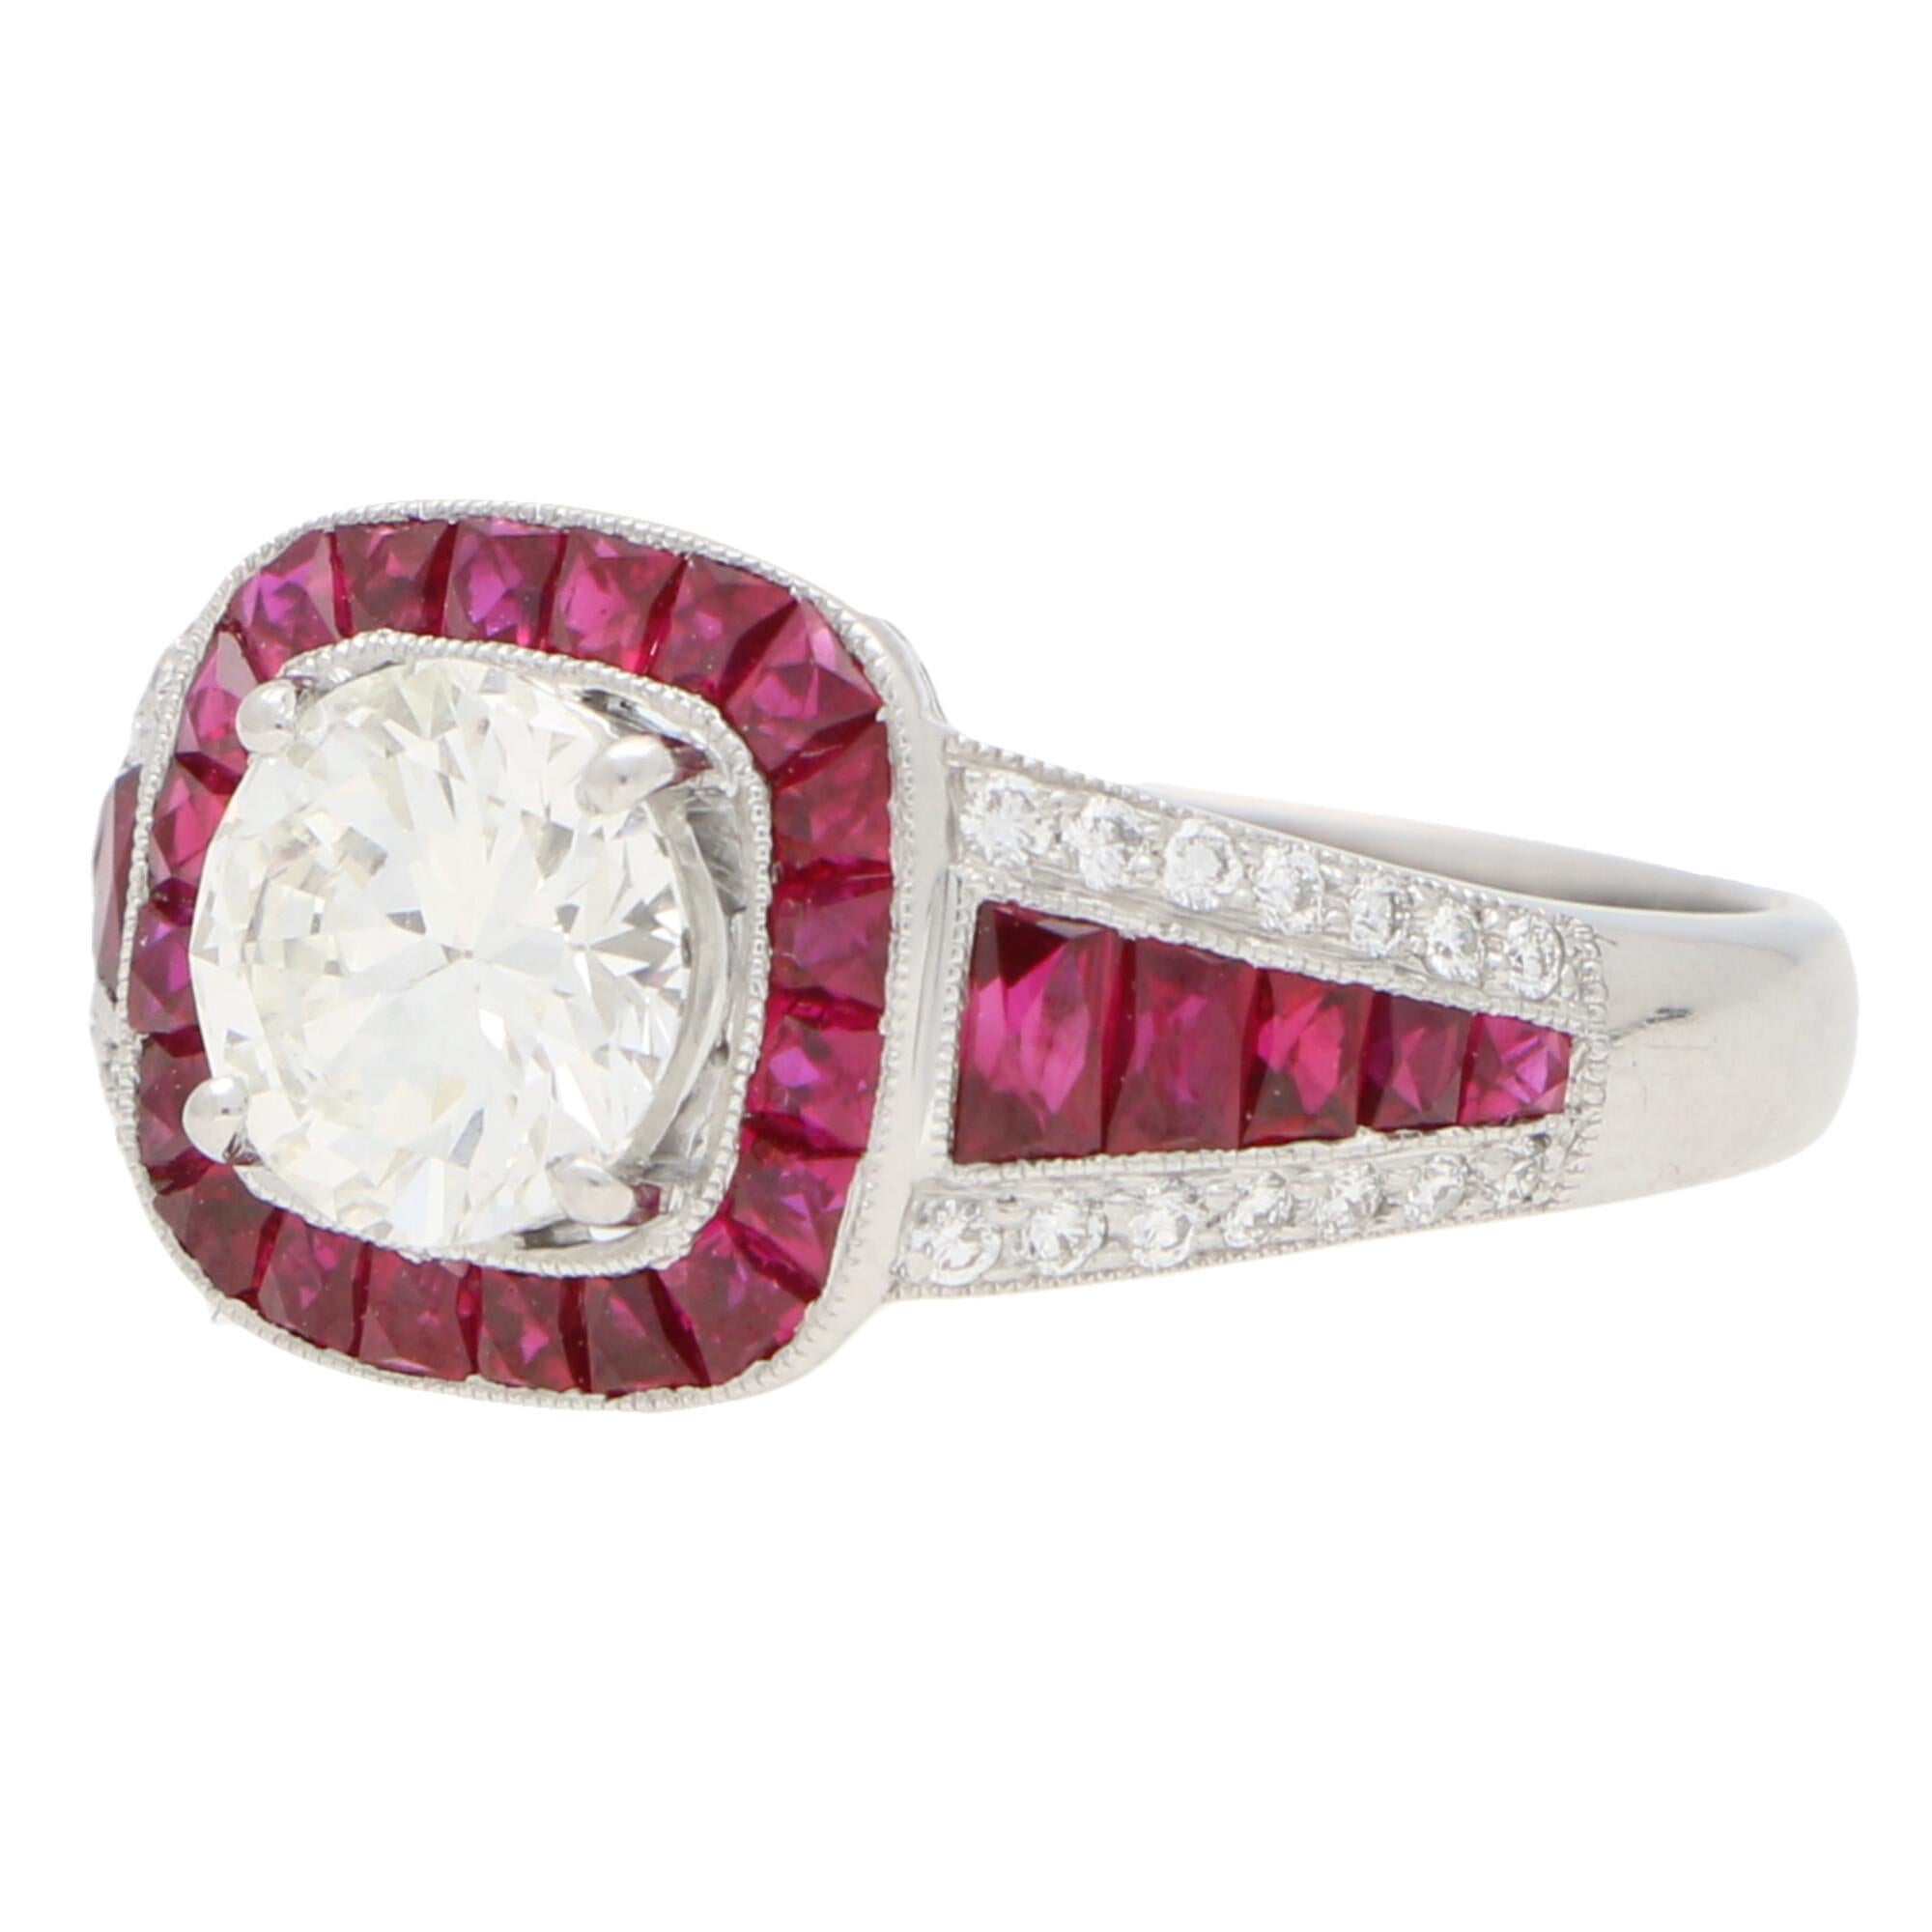 A beautiful Art Deco inspired ruby and diamond target engagement / dress ring set in platinum. 

The ring is predominantly set with a stunning old cut diamond which is four claw set to centre. The central diamond is then surrounding by a halo of 20